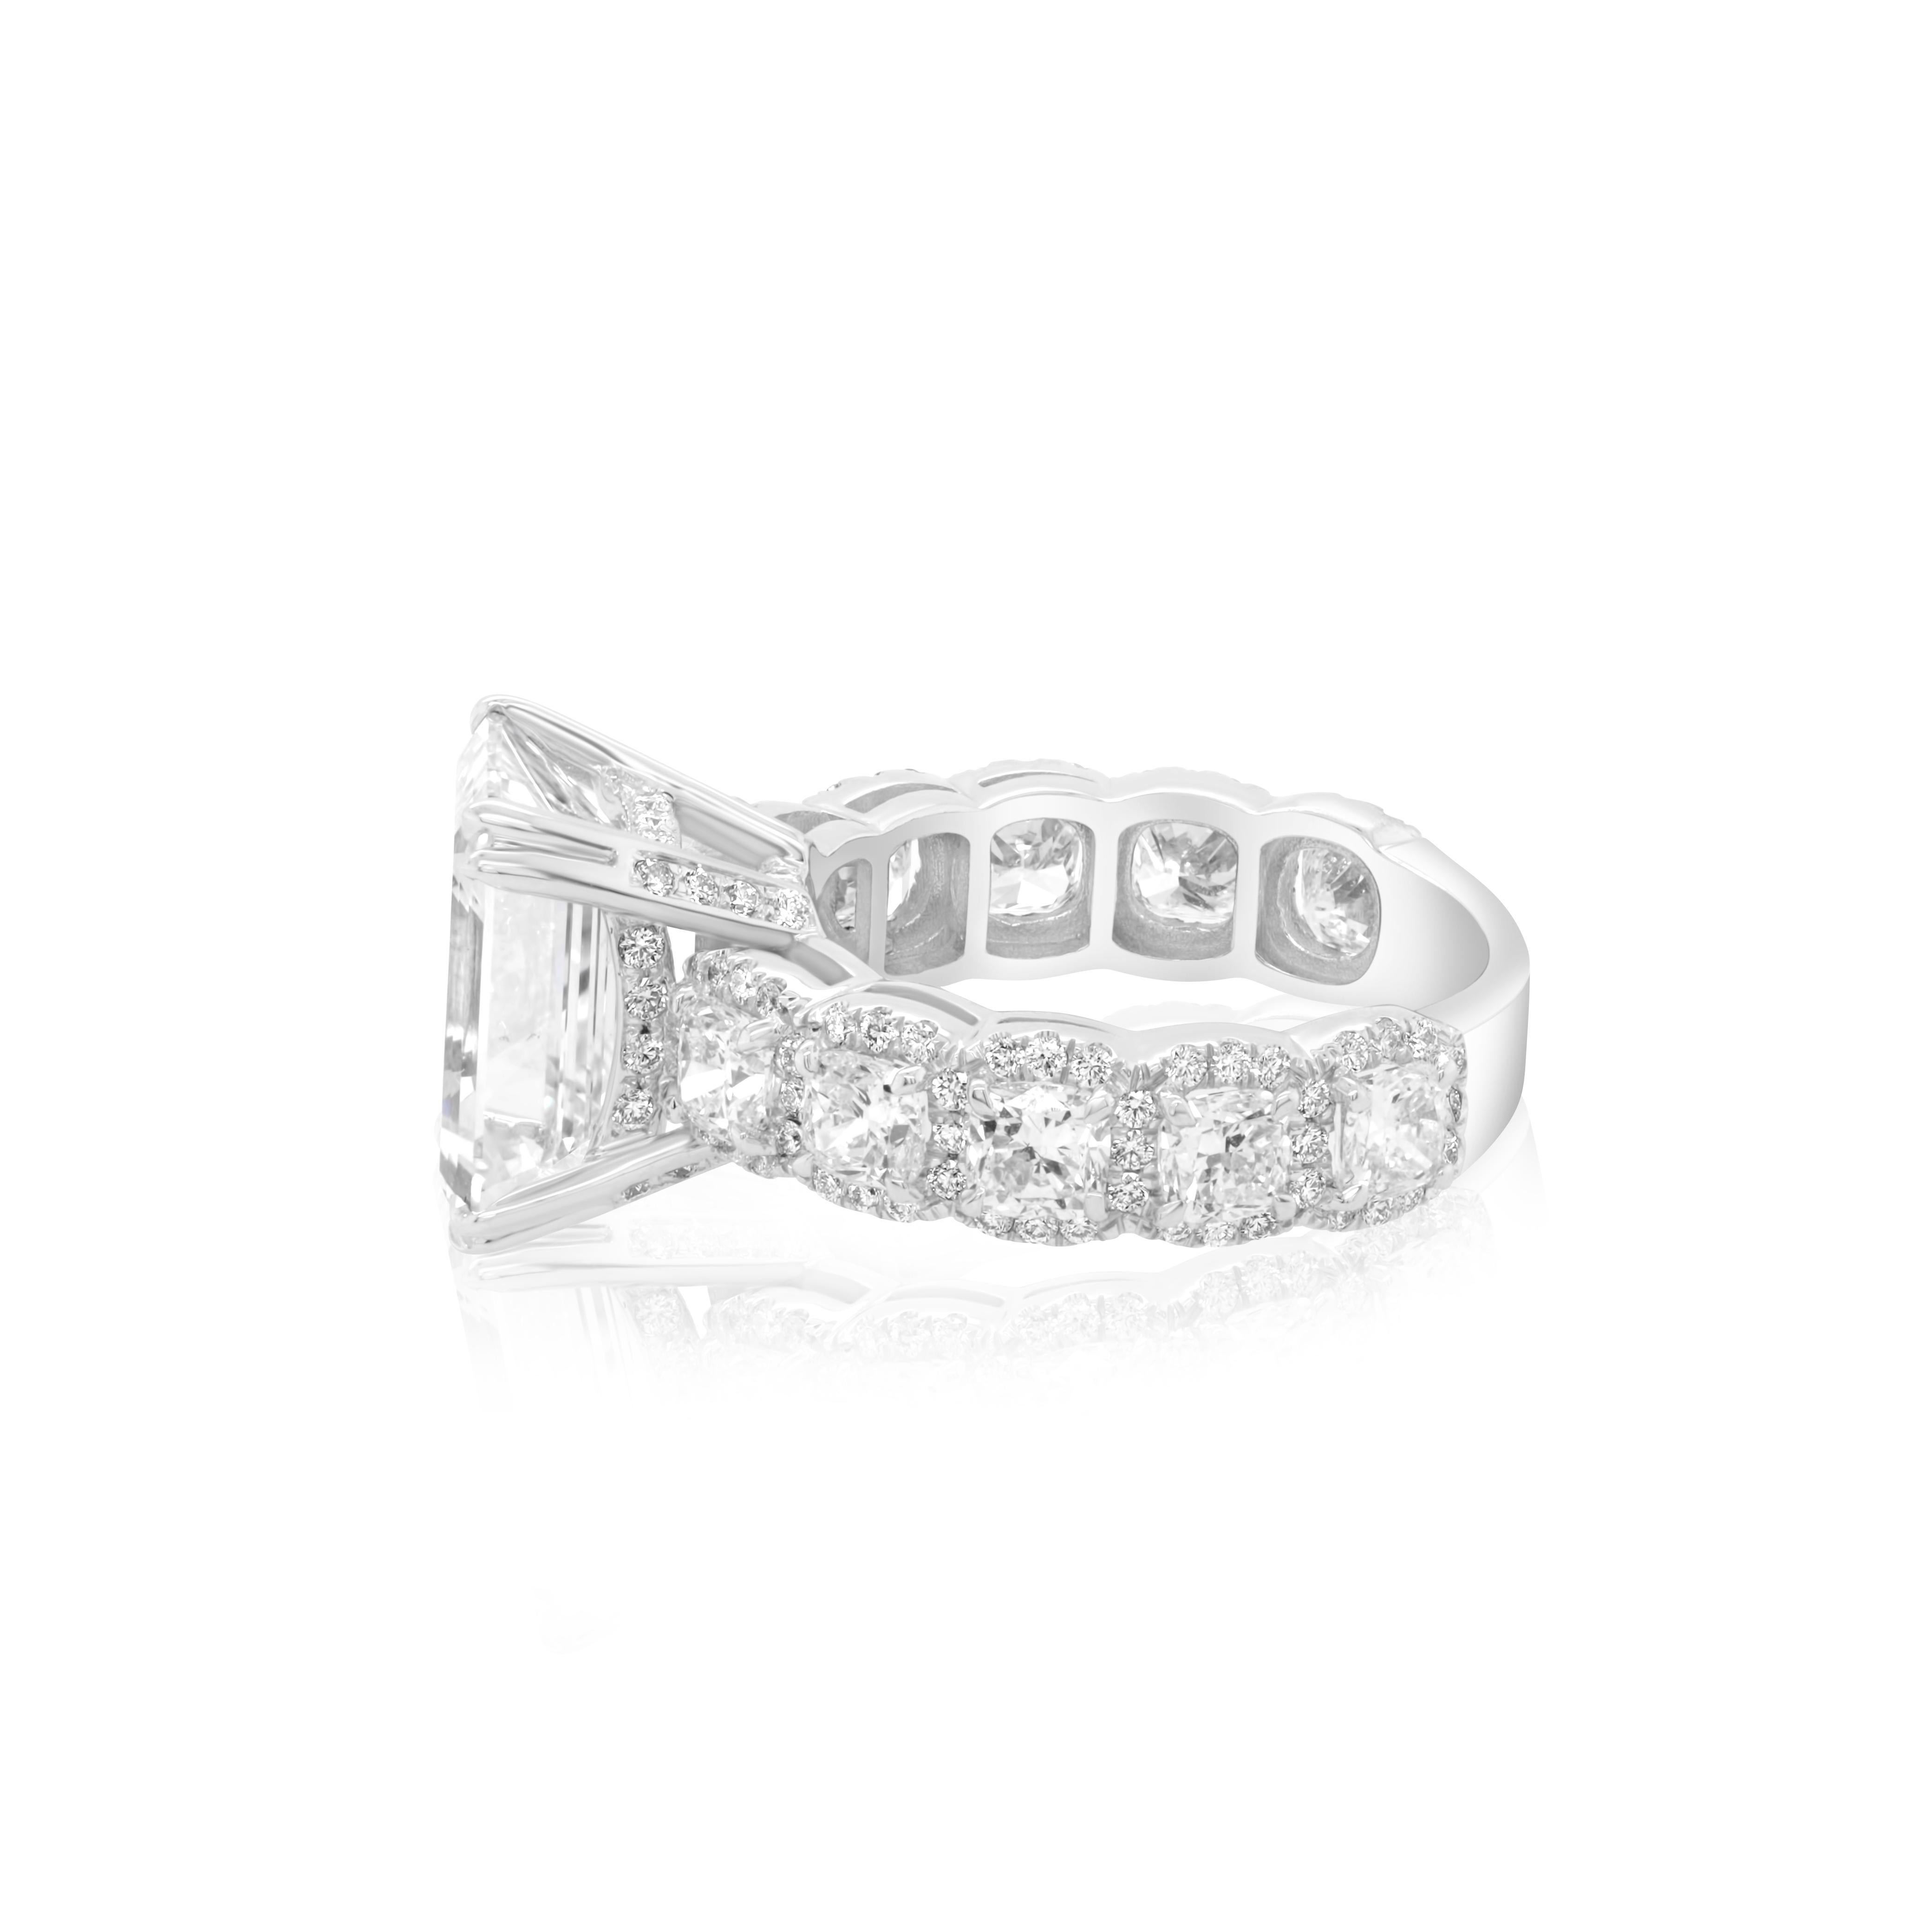 Modern Diana M. GIA 5.04ct Emerald Cut Engagment Ring With 3.00ct Of Side Diamonds  For Sale